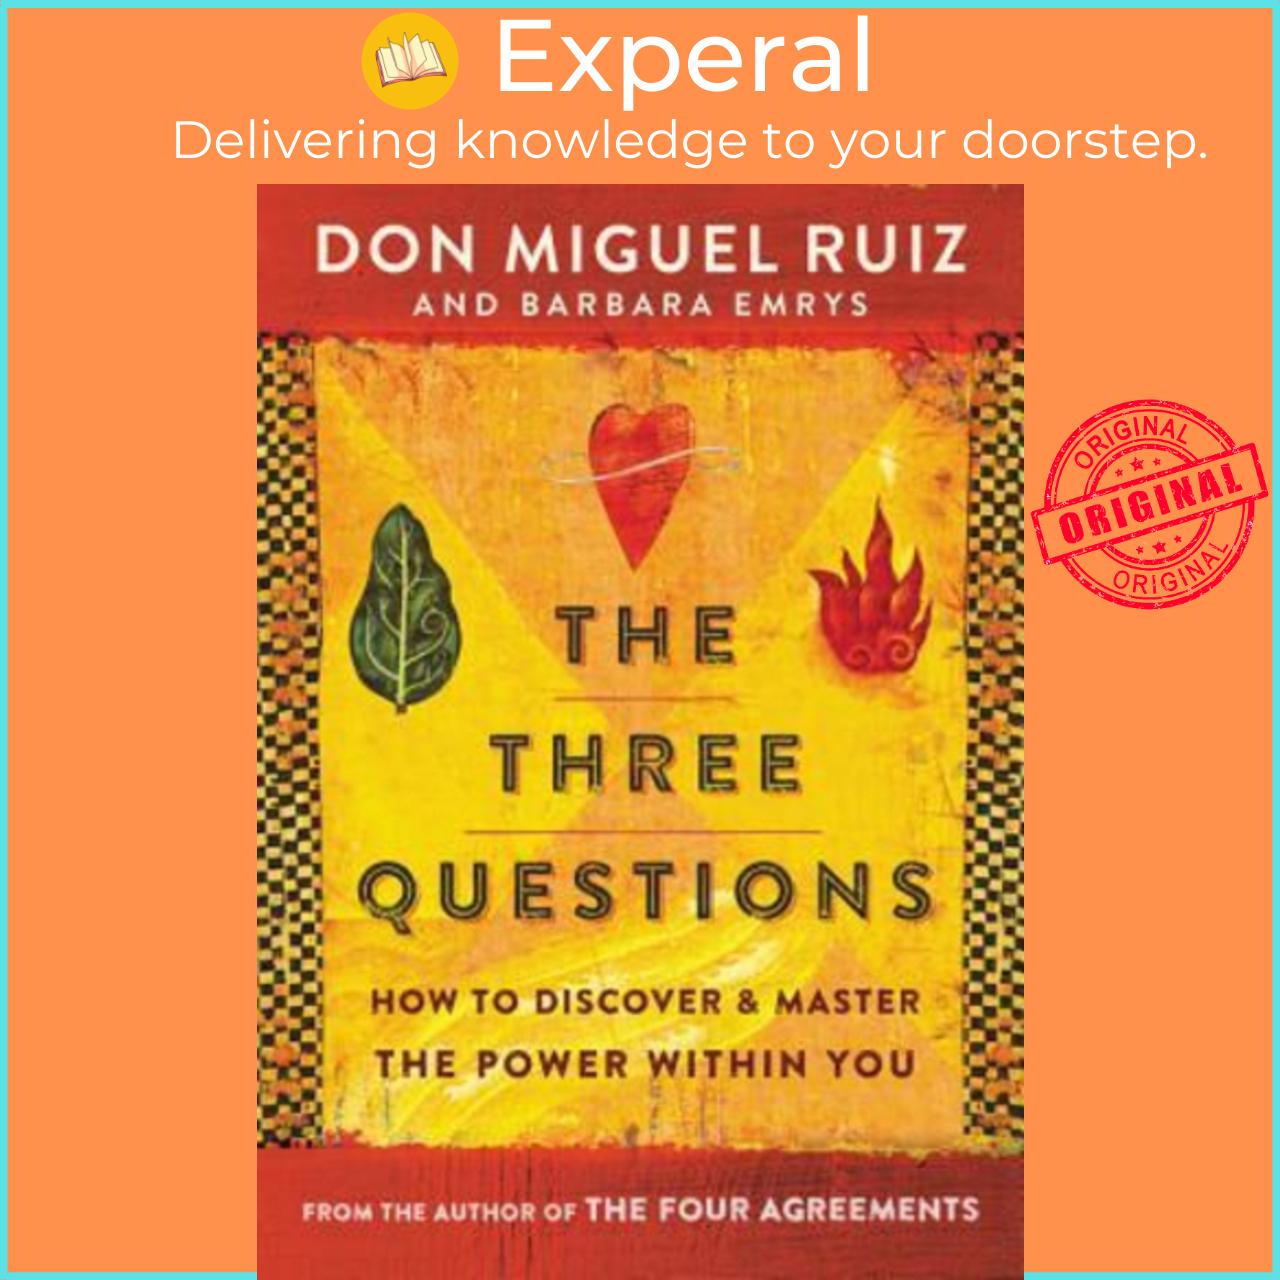 Miguel　Mua　Three　Experal　to　Master　by　Power　Sách　and　tại　Questions　Within　Discover　Don　How　The　paperback)　edition,　Tiki　the　Ruiz　You　(US